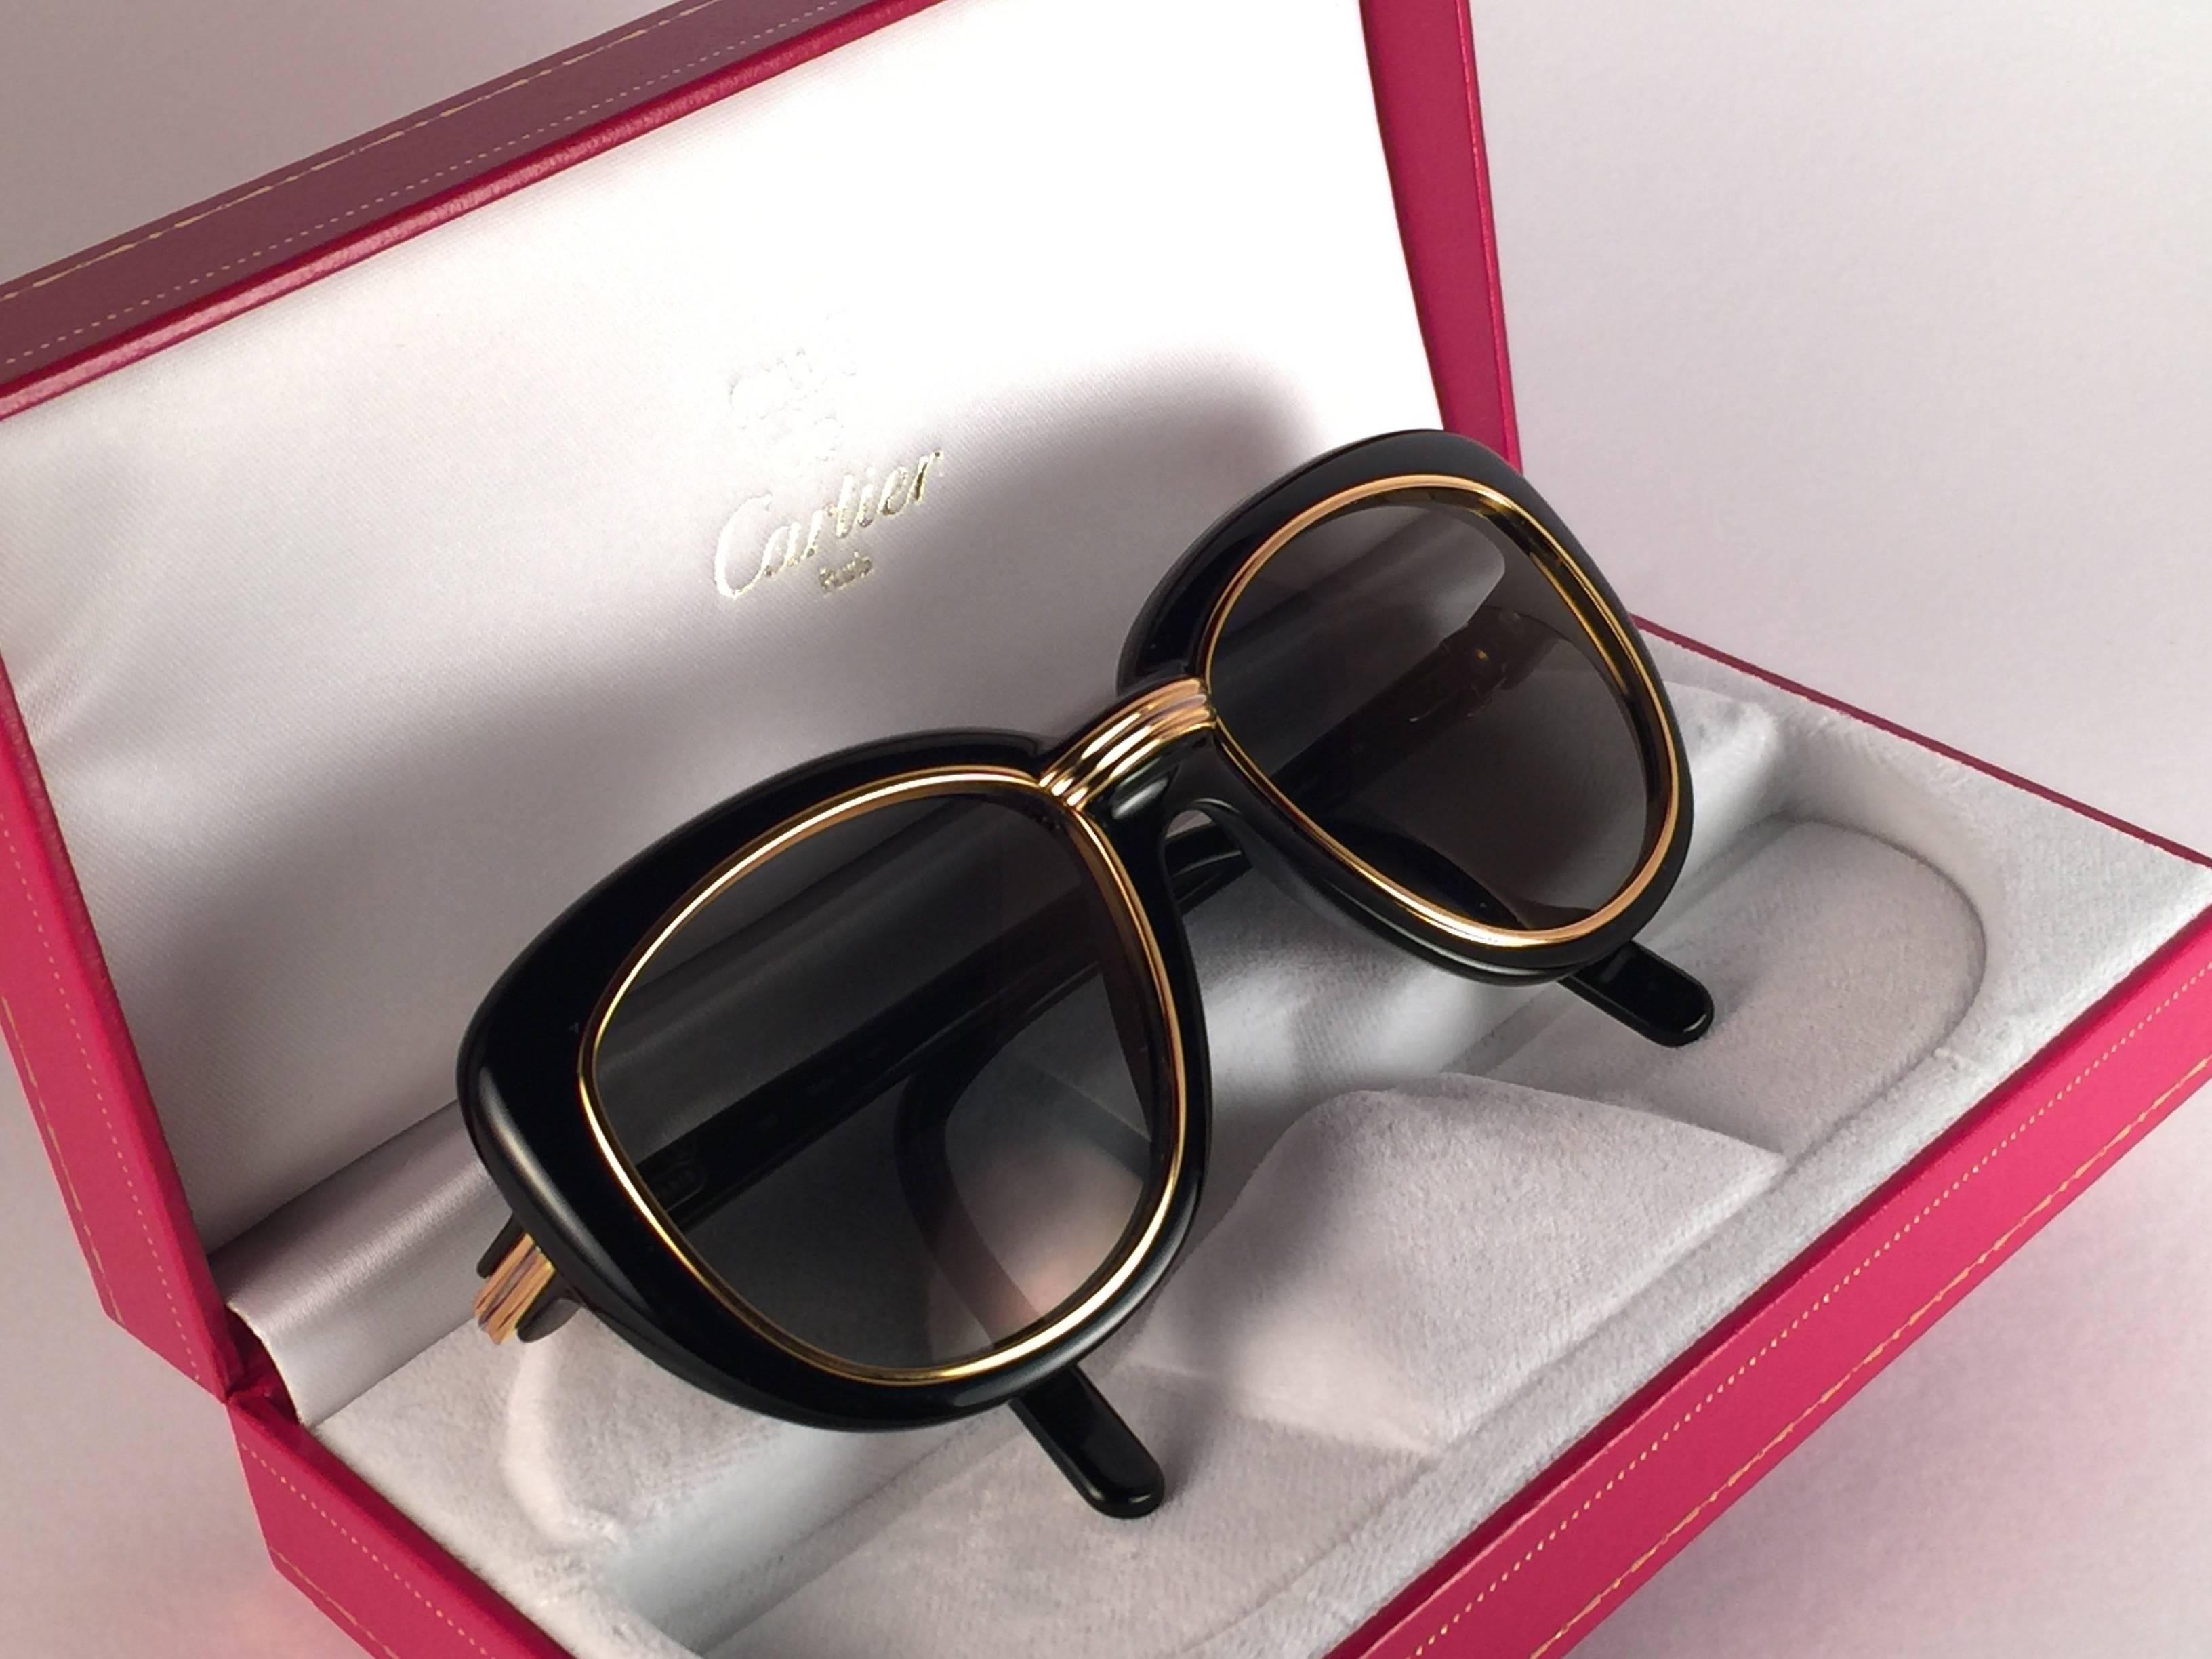 New Cartier Conquete Sunglasses with grey slight gold mirror  (uv protection) lenses. Yellow and white gold inserts and accents. All hallmarks. Both arms sport the C from Cartier on the temple. These are like a pair of jewels on your nose with the